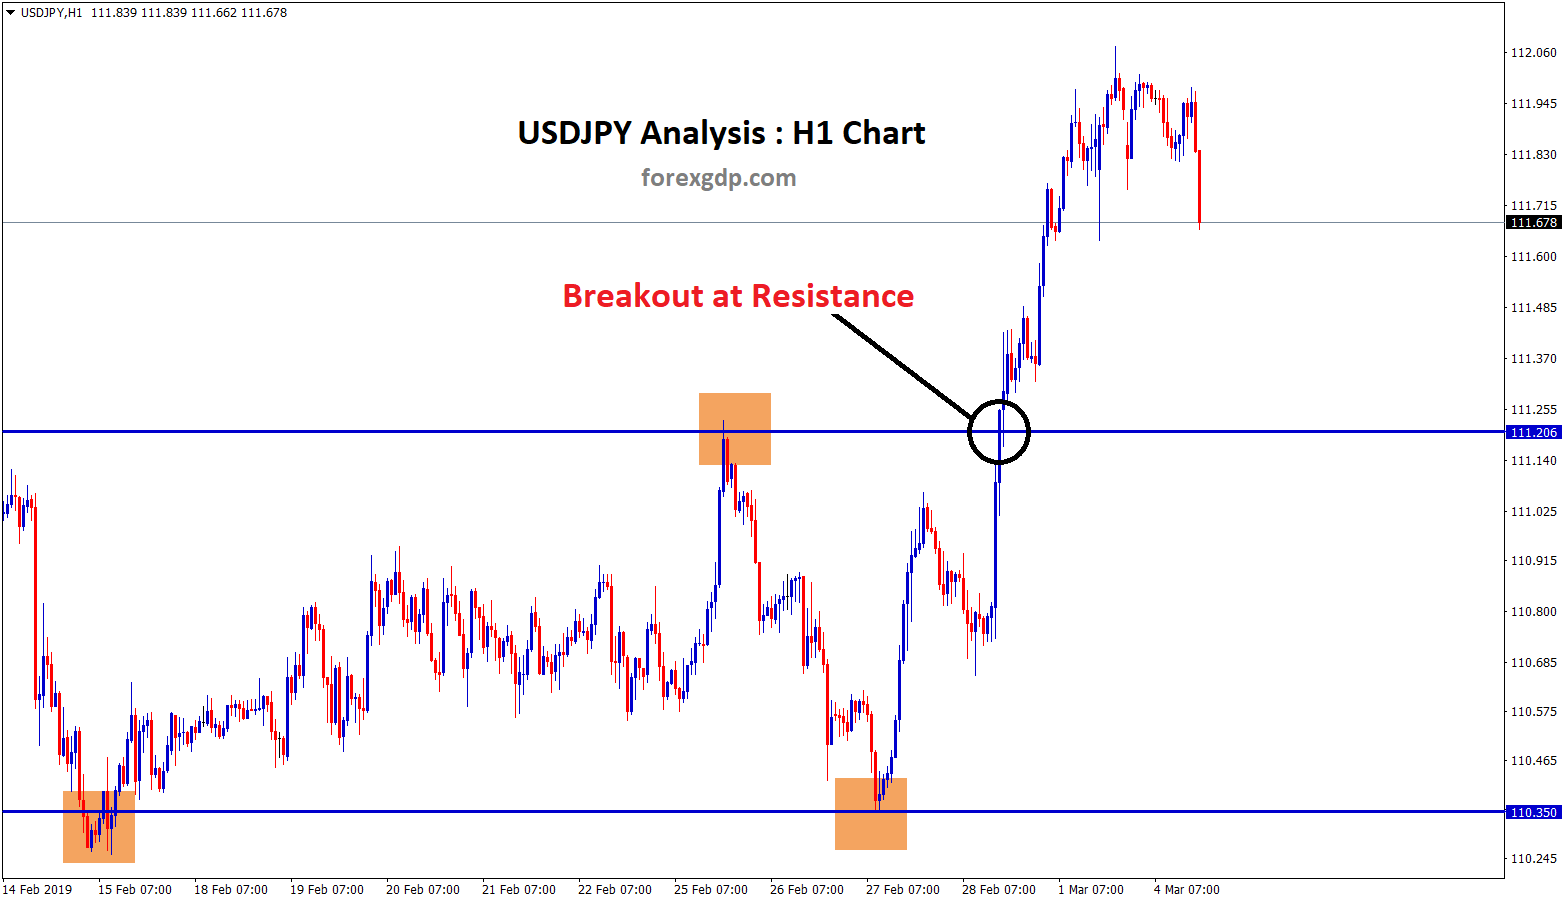 breakout at resistance level